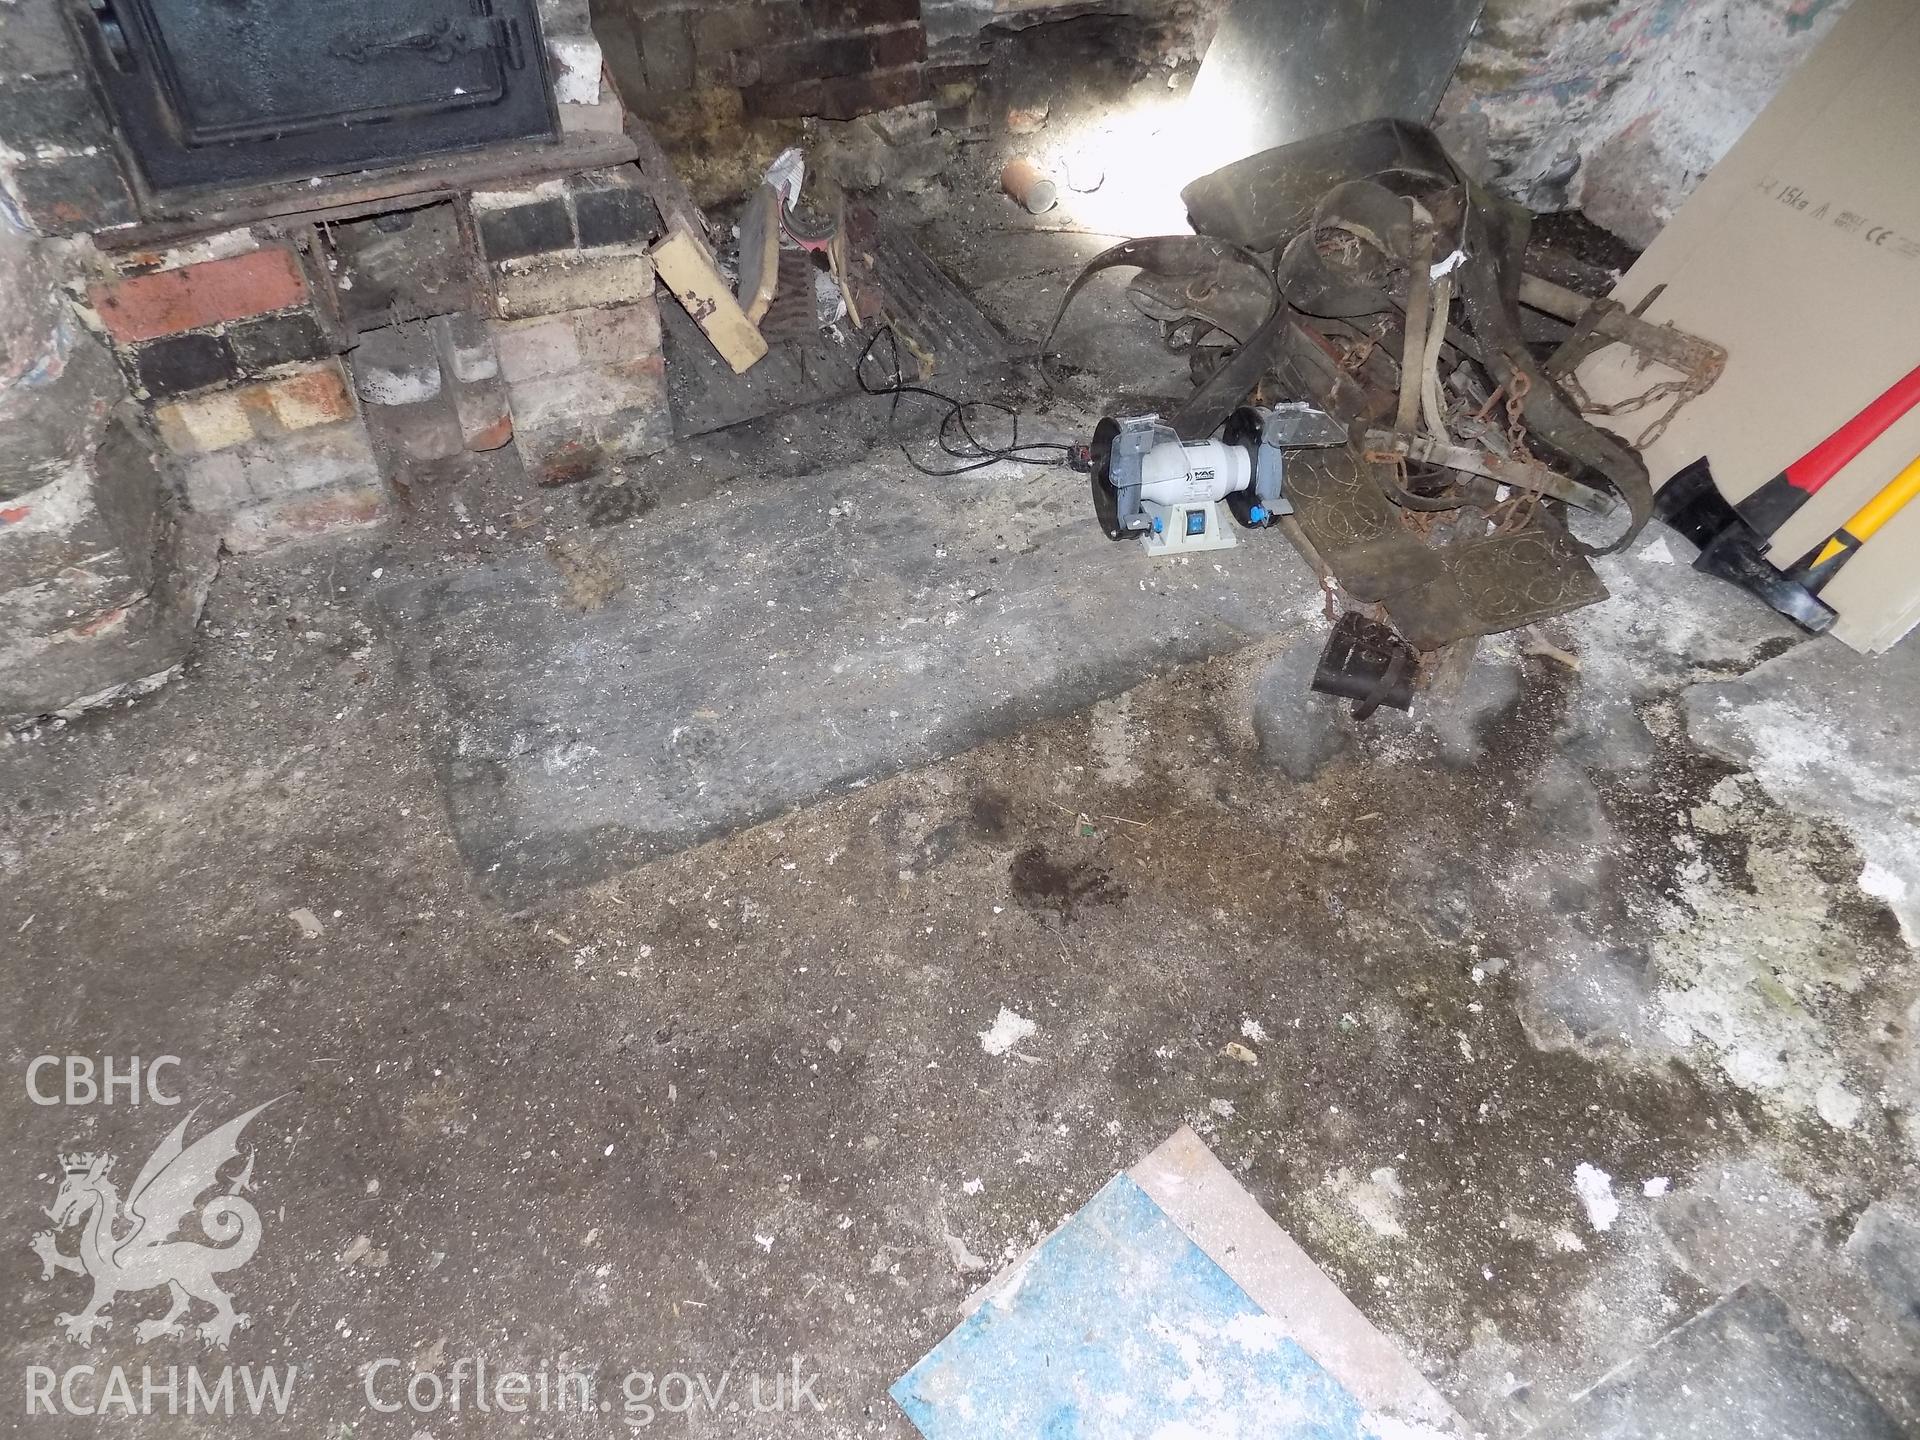 Digital colour photograph showing detailed view of interior floor in building attached to Tywyll Nodwydd house, Pennal, dated 2019. Photographed by Mr Gary Coulsby to meet a condition attached to a planning application.